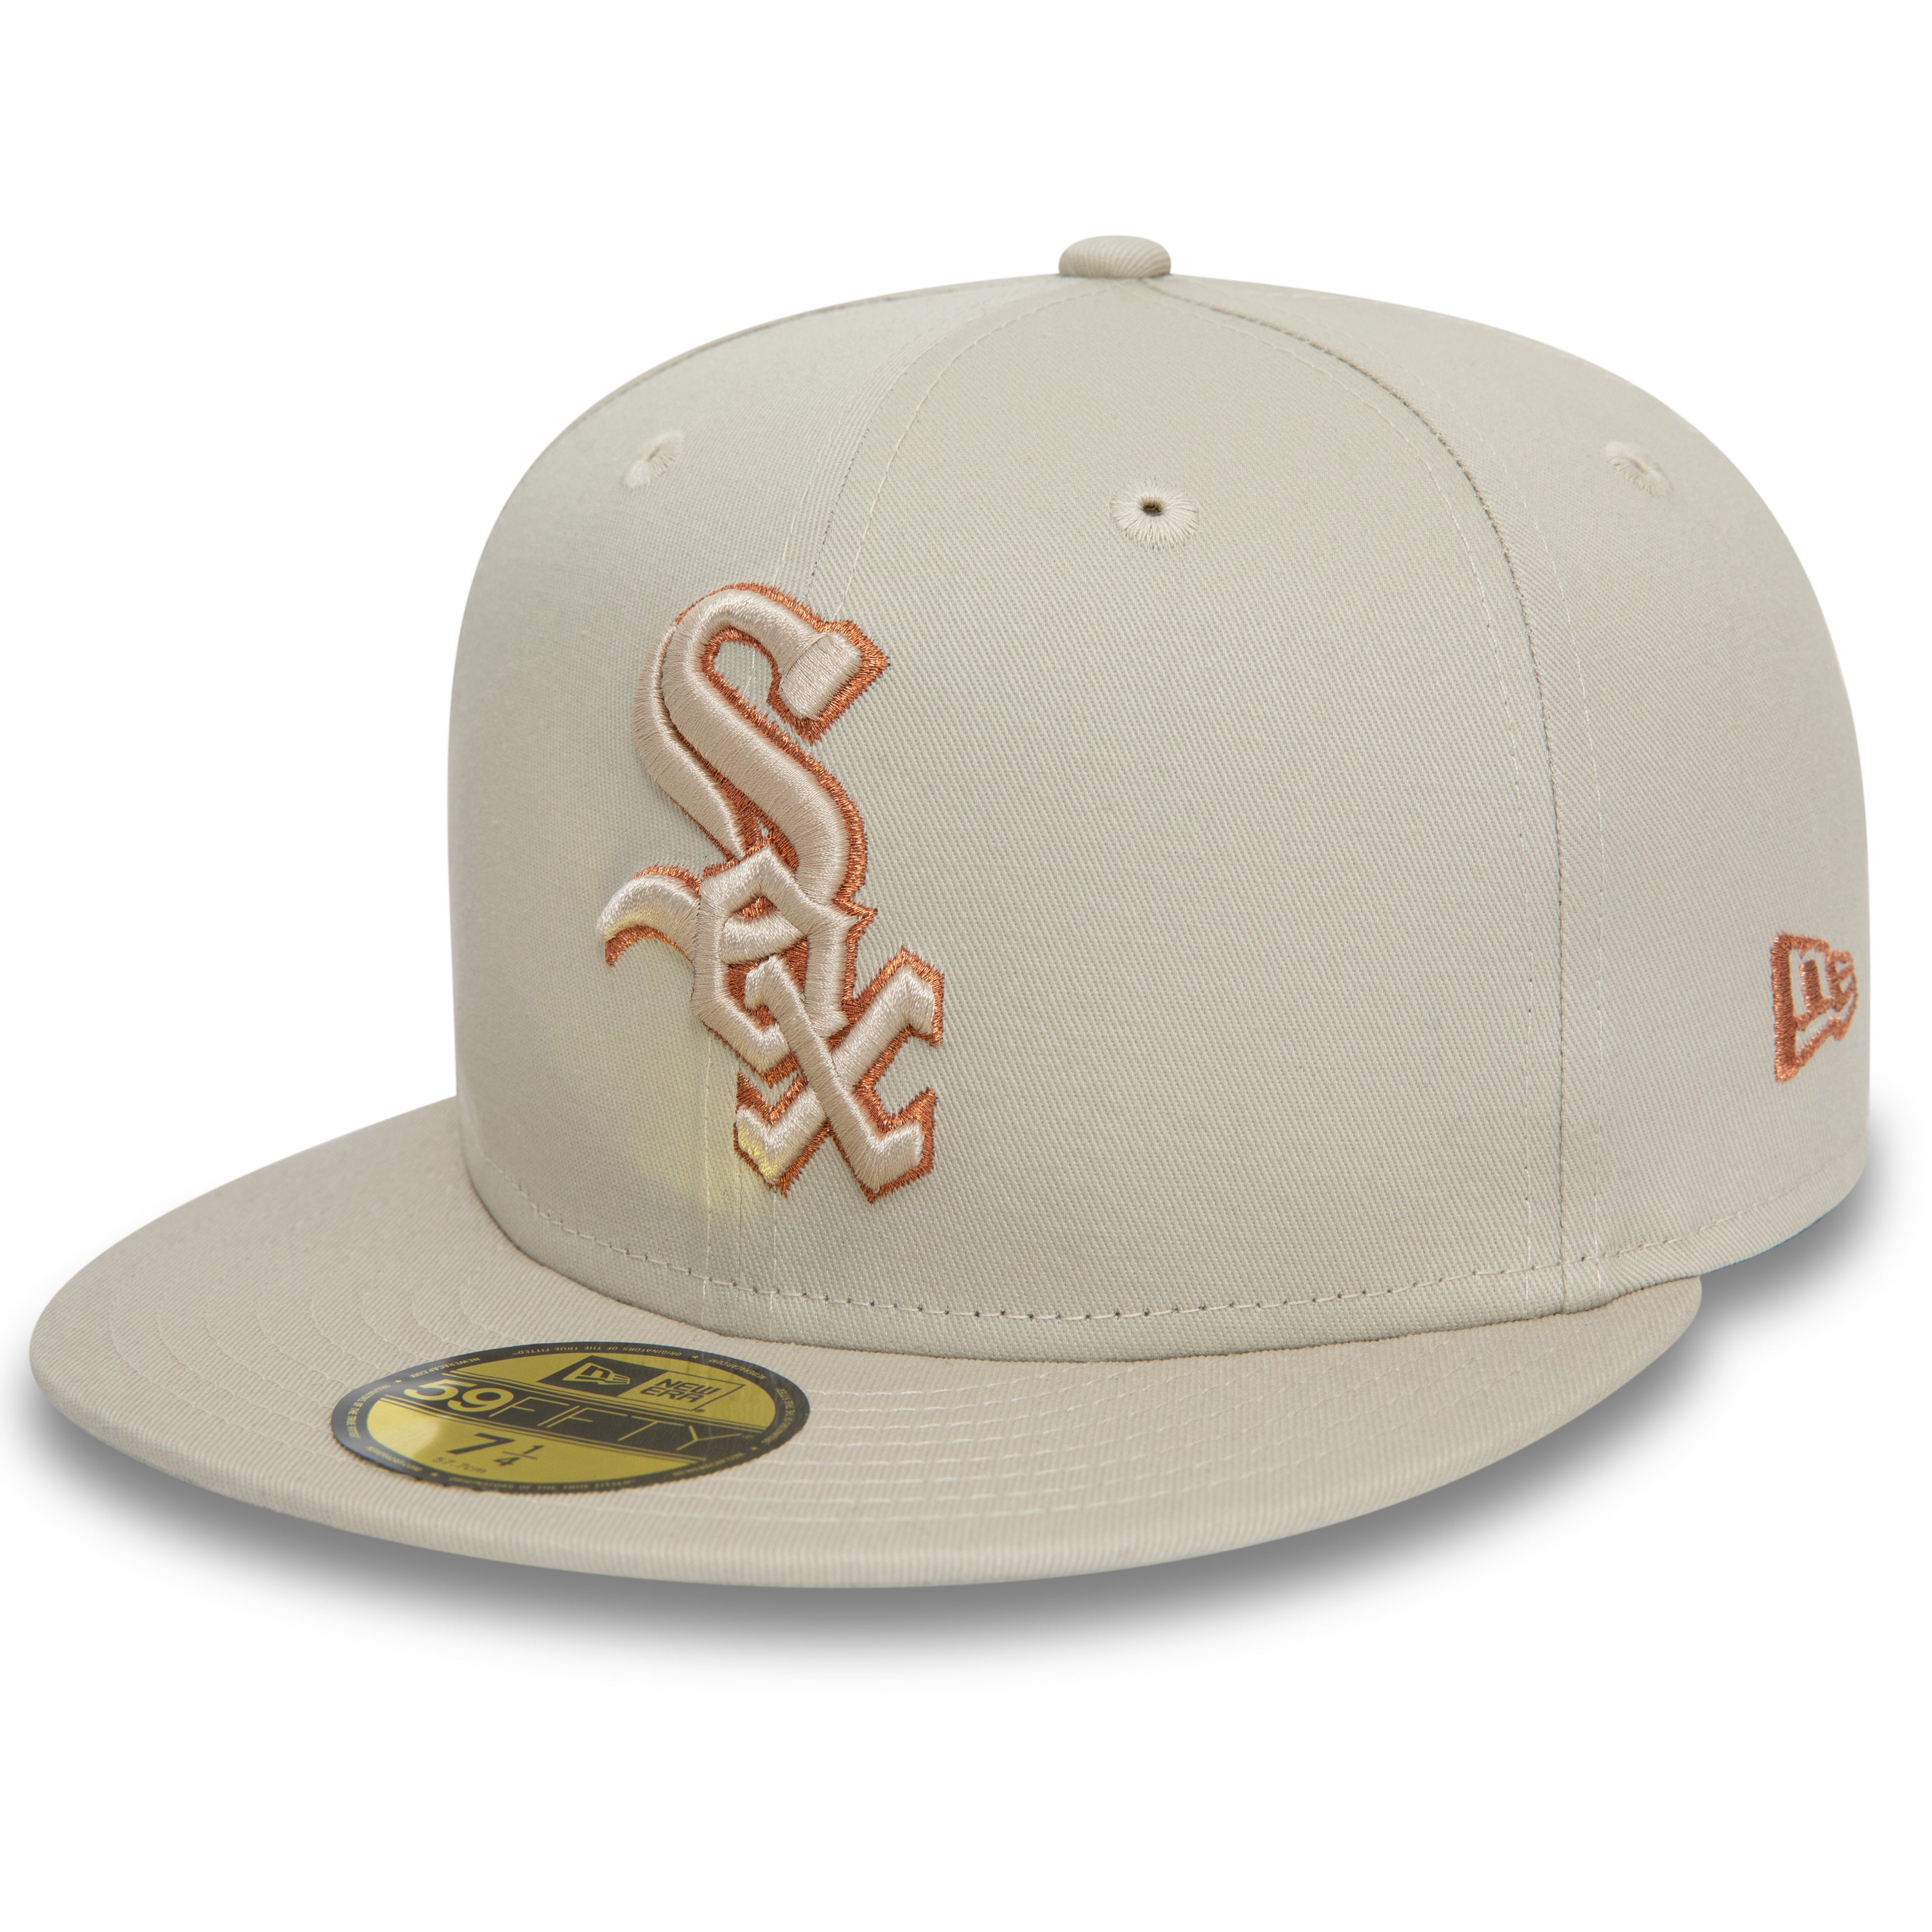 NEW ERA 59FIFTY MLB CHICAGO WHITE SOX METALLIC OUTLINE STONE FITTED CAP